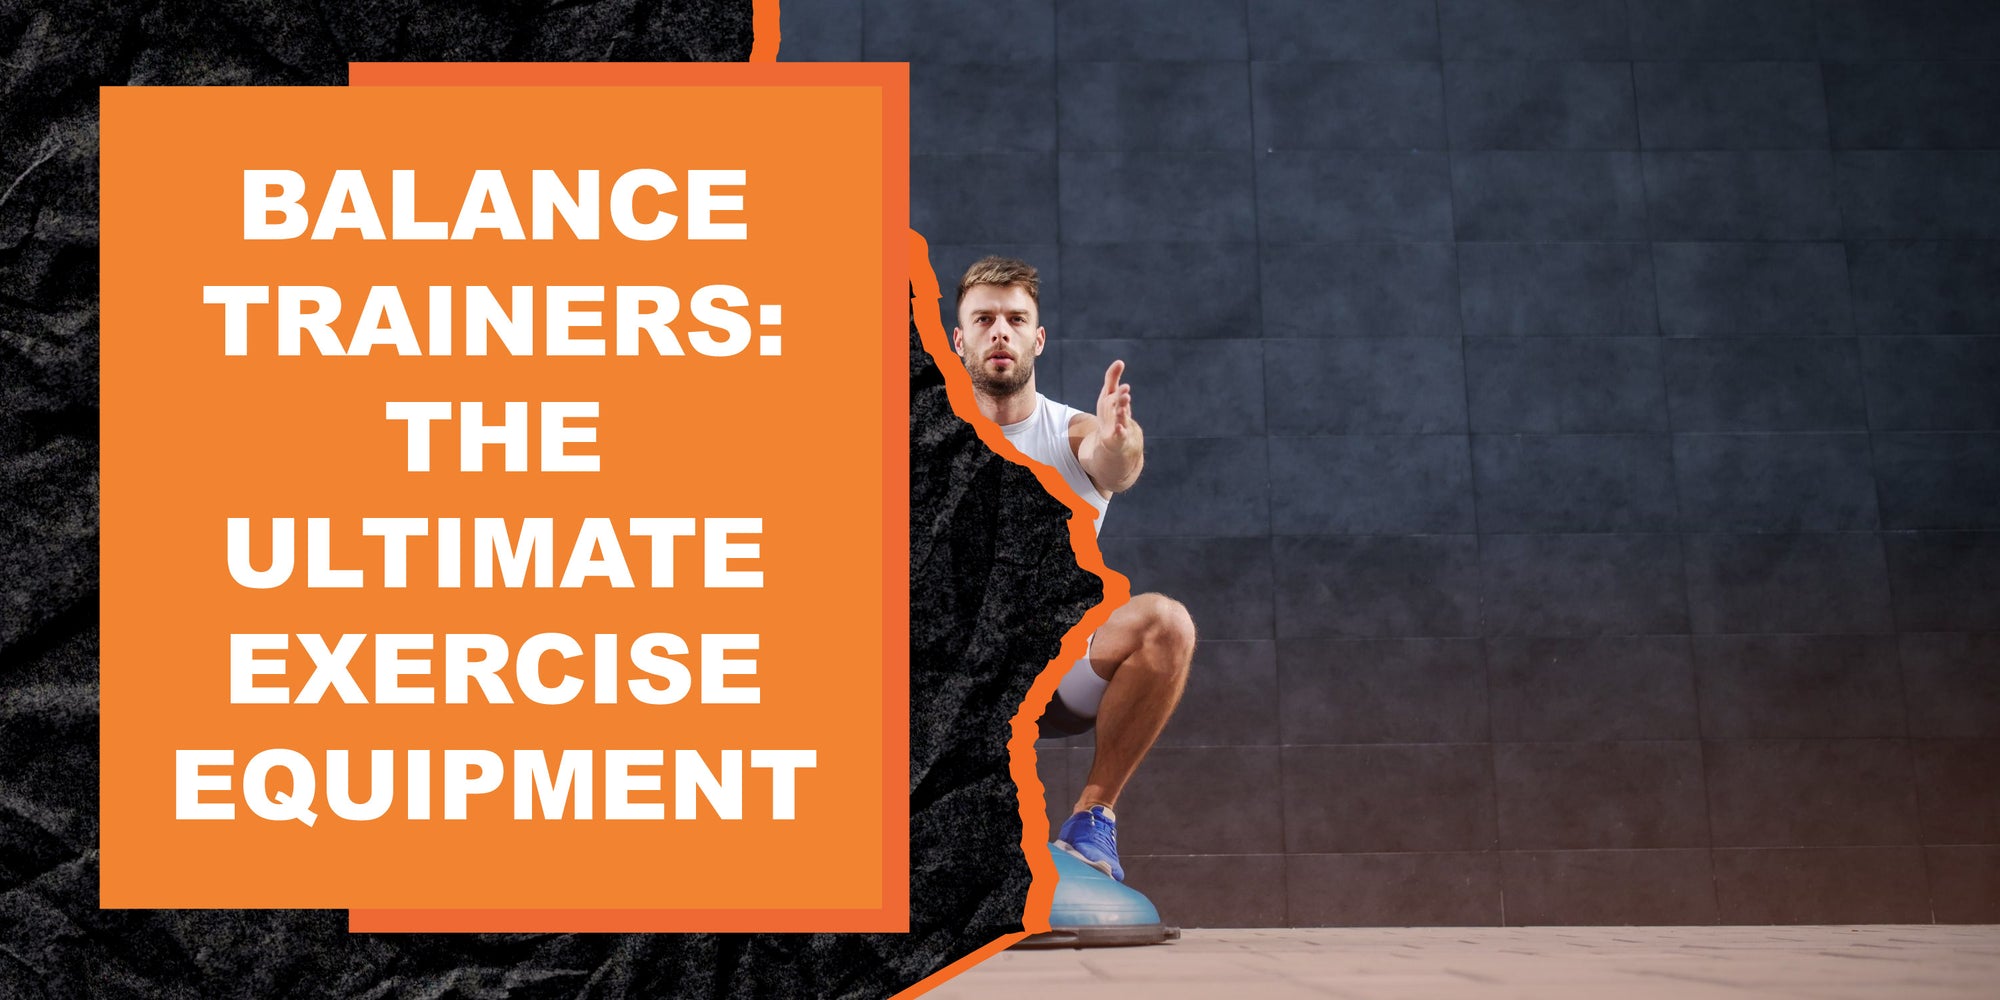 Balance Trainers: The Ultimate Exercise Equipment